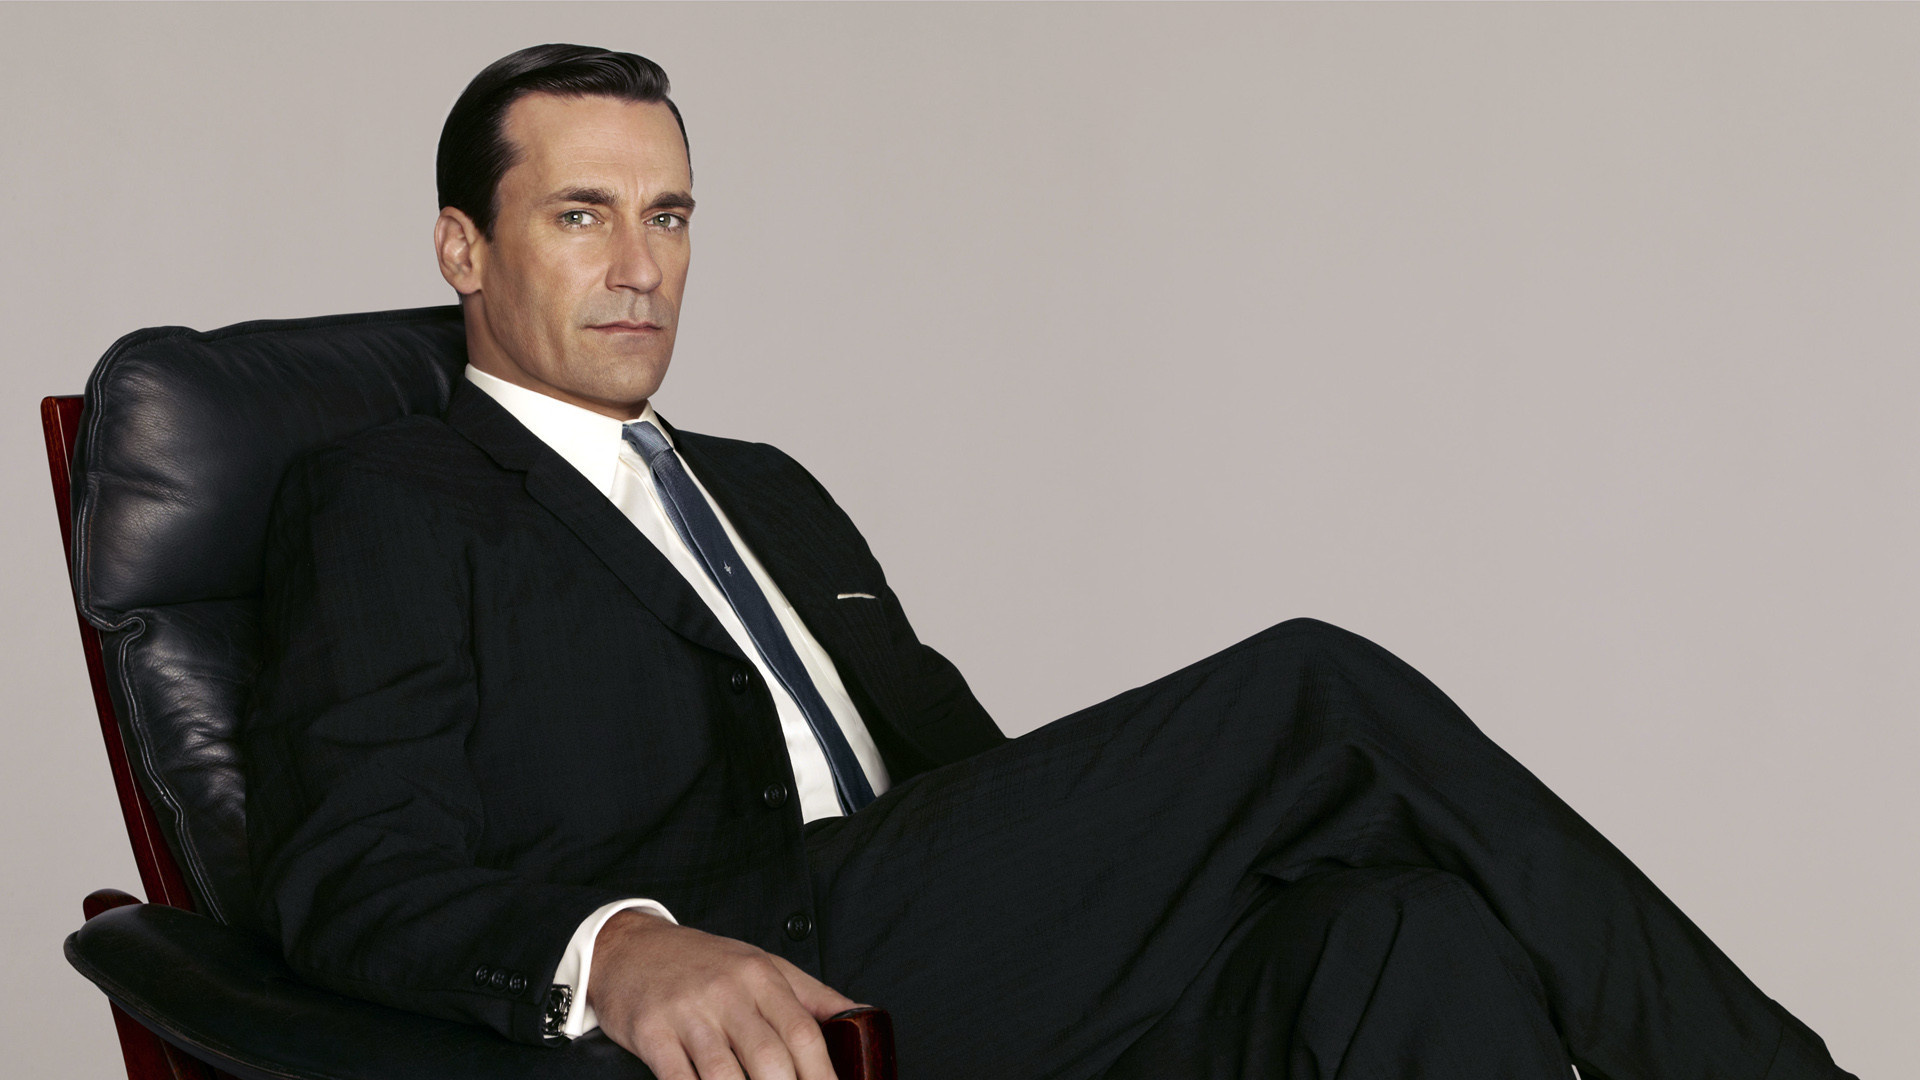 Mad Men (TV Series): Two Screen Actors Guild Awards for Outstanding Ensemble in a Drama Series. 1920x1080 Full HD Background.